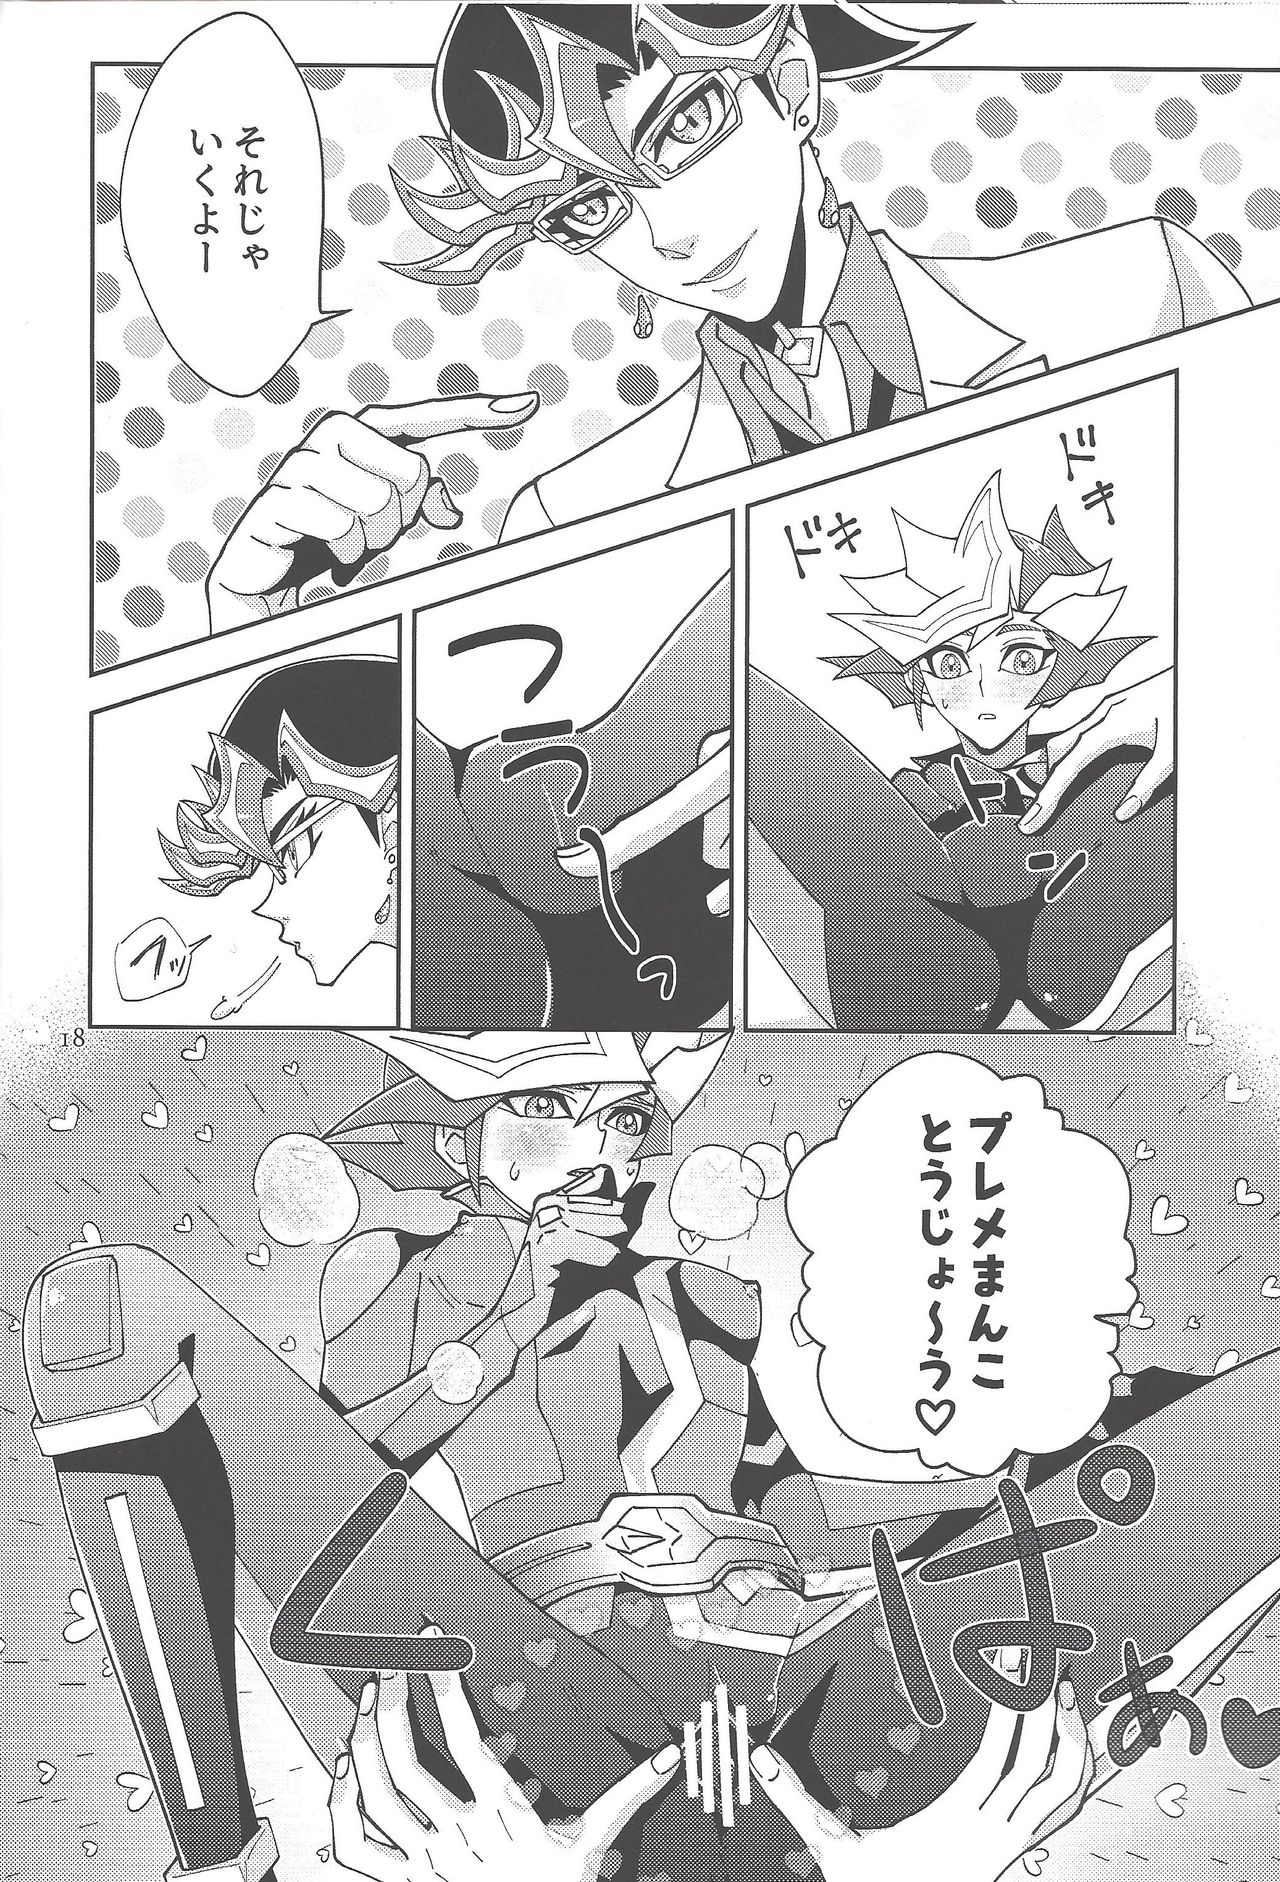 (Lucky Card! 1) [ZPT (ポミヲ)] Aiちゃんセンセーとプレメちゃん2 (遊☆戯☆王VRAINS)